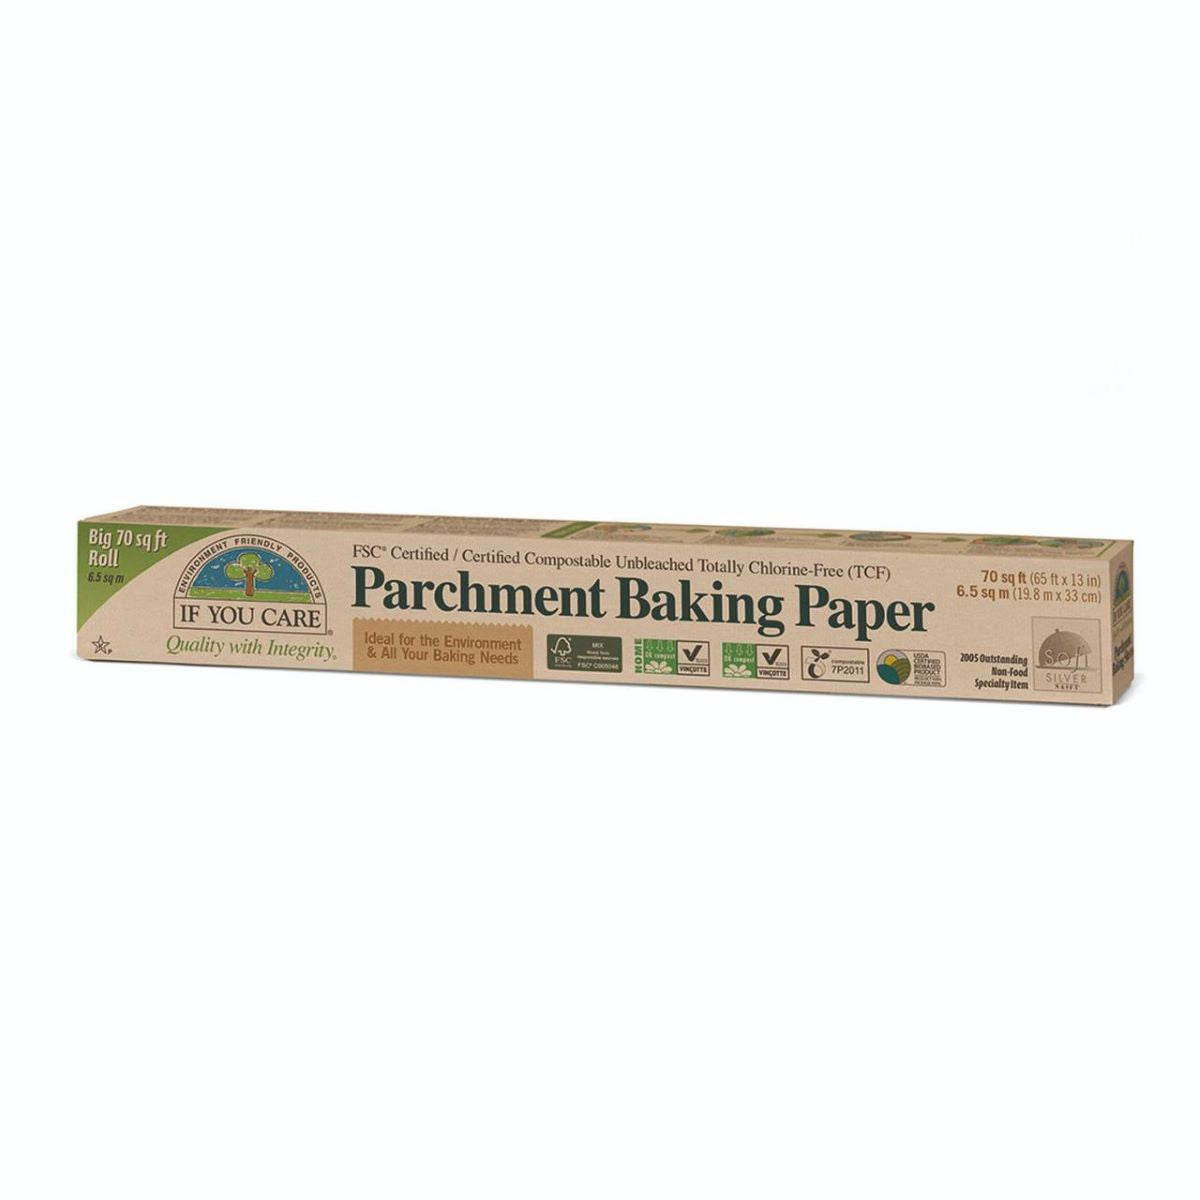 If You Care Parchment Baking Paper Roll 19.8M